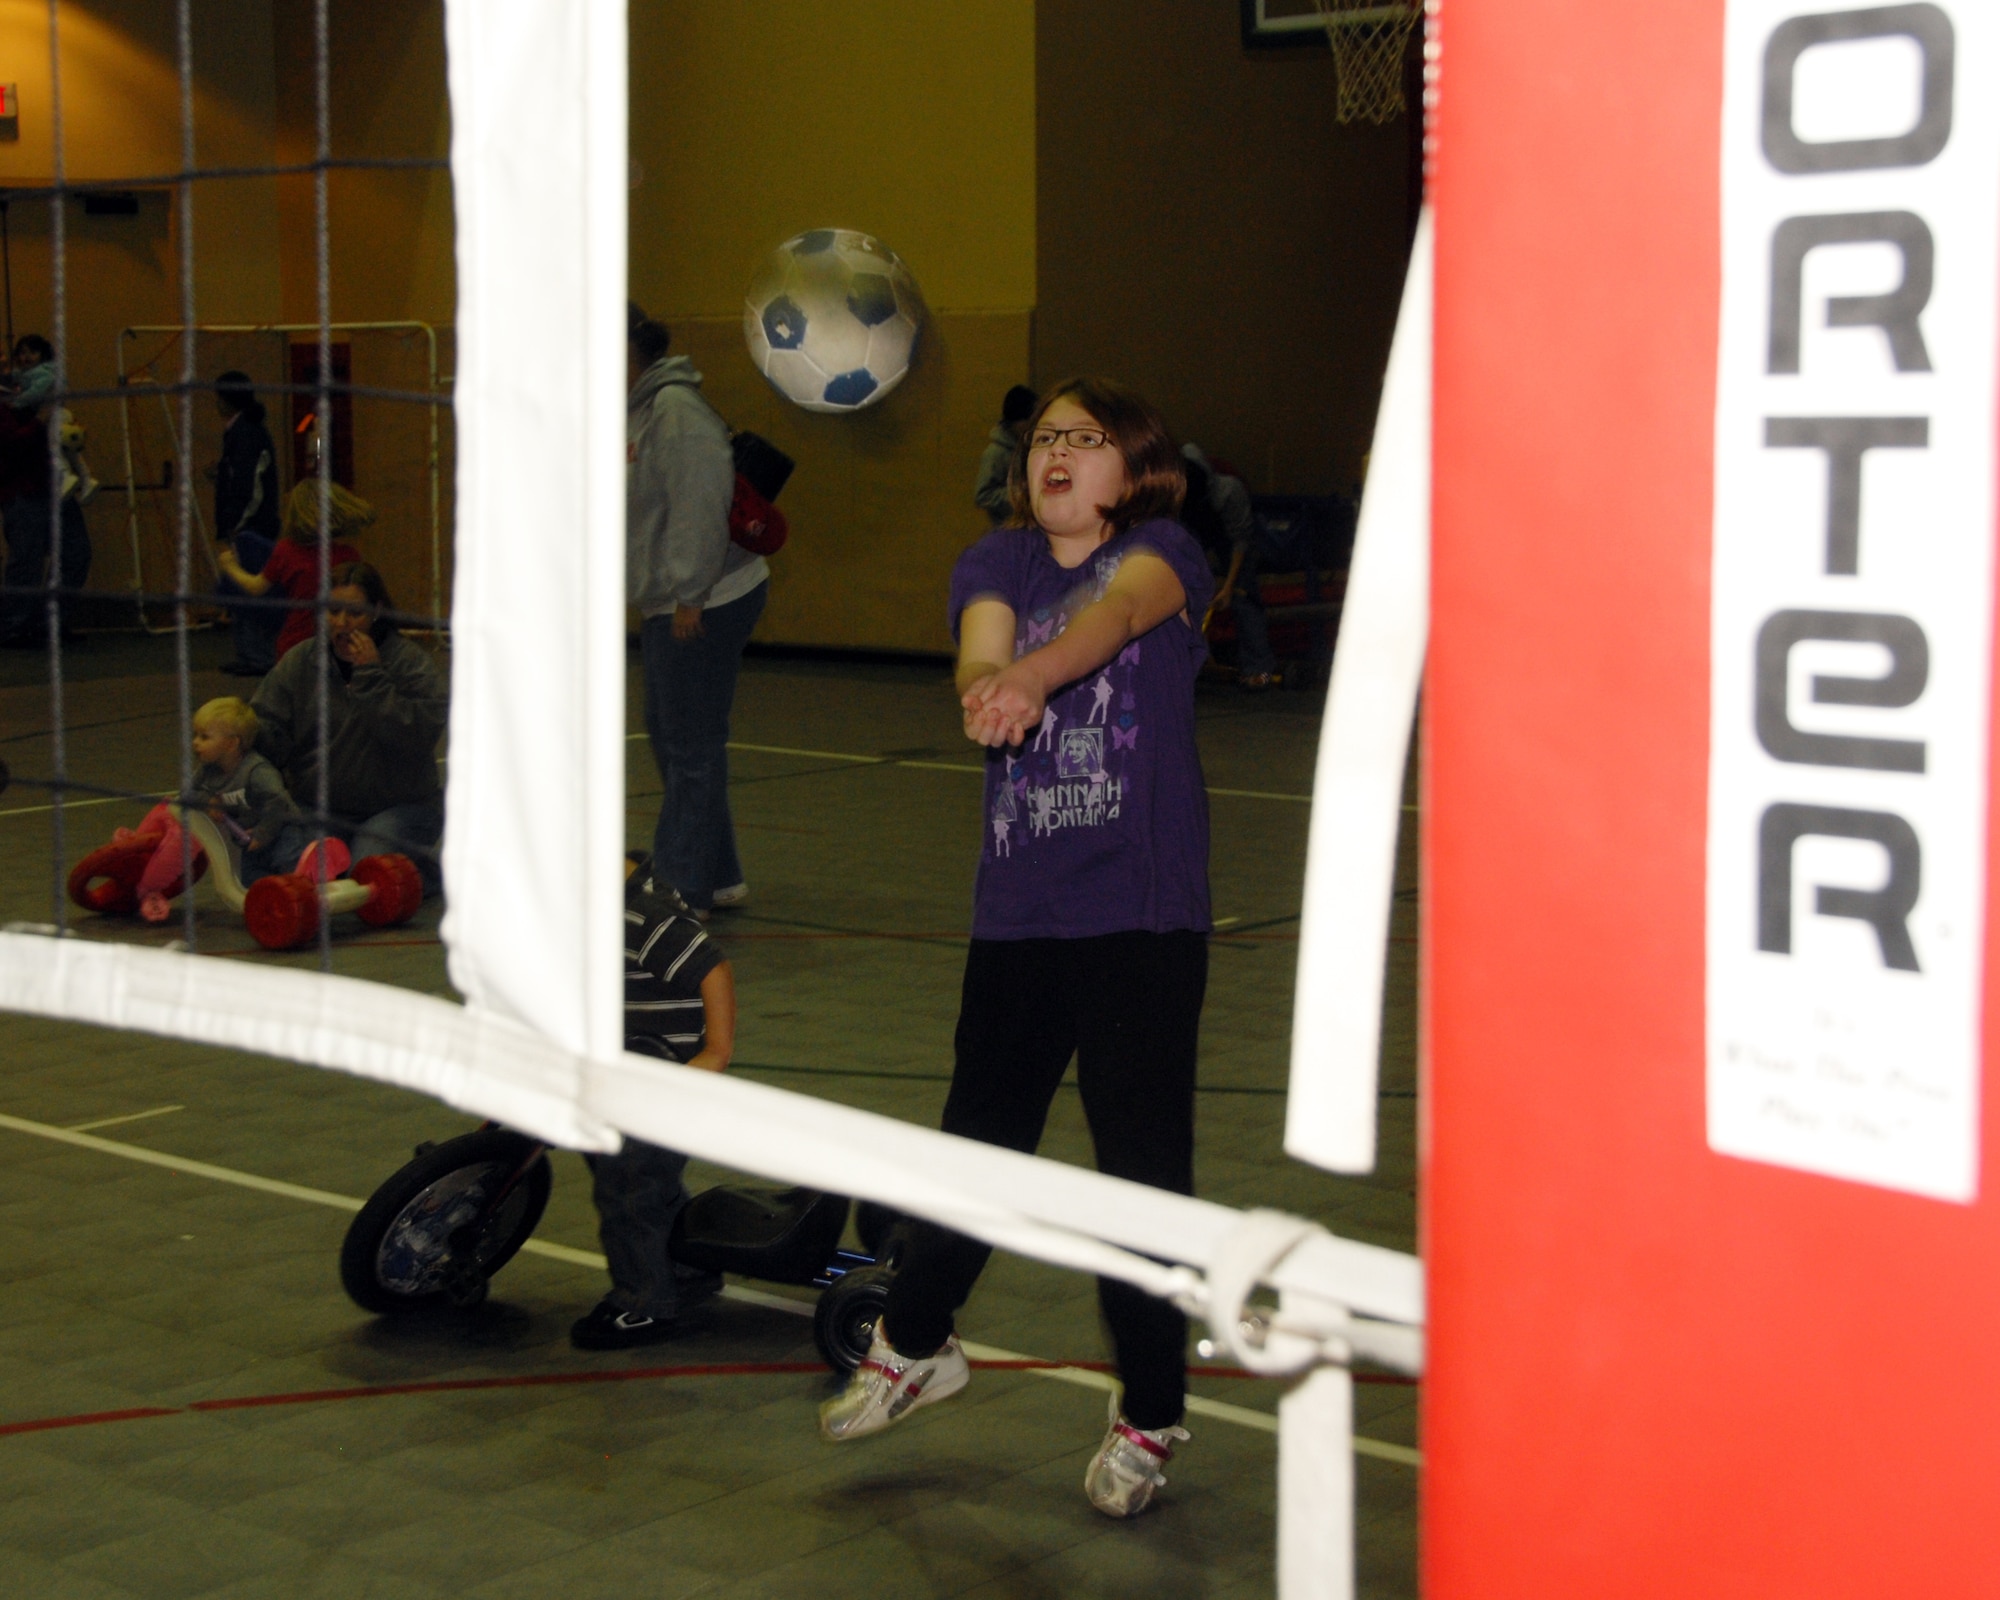 Rylee Spidell, the daughter of Staff Sgt. Tony and Lisa Spidell, 185th Air Refueling Wing, works on her volleyball skills during an outing sponsored by the Bats Family Club.  The Bats family Club is part of the Family Readiness Group made up of volunteers who pursue the well-being of the 185th families, providing support and camaraderie within the family structure.
Official Air Force photo by; Master Sgt. Bill Wiseman (Released)
